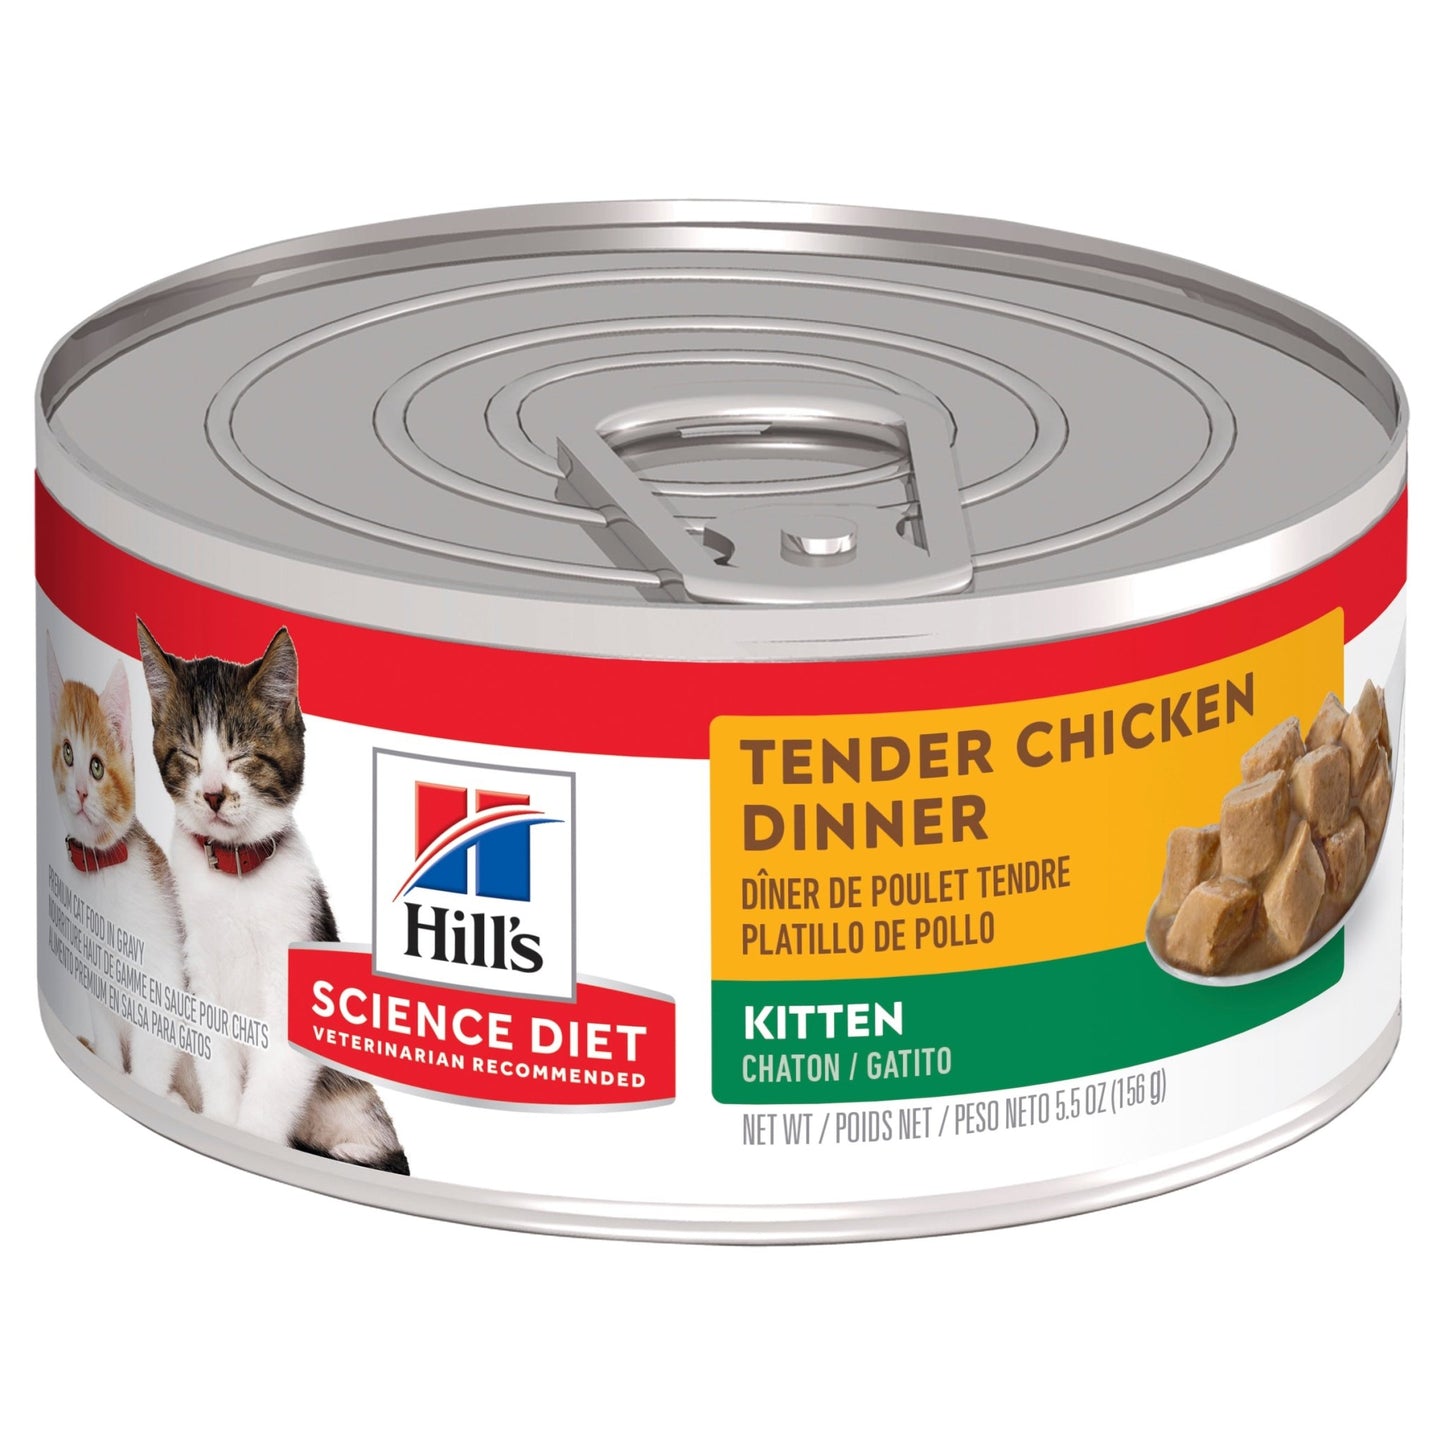 Hill's Science Diet Kitten Tender Dinners Chicken Canned Cat Food 24x156g - Woonona Petfood & Produce